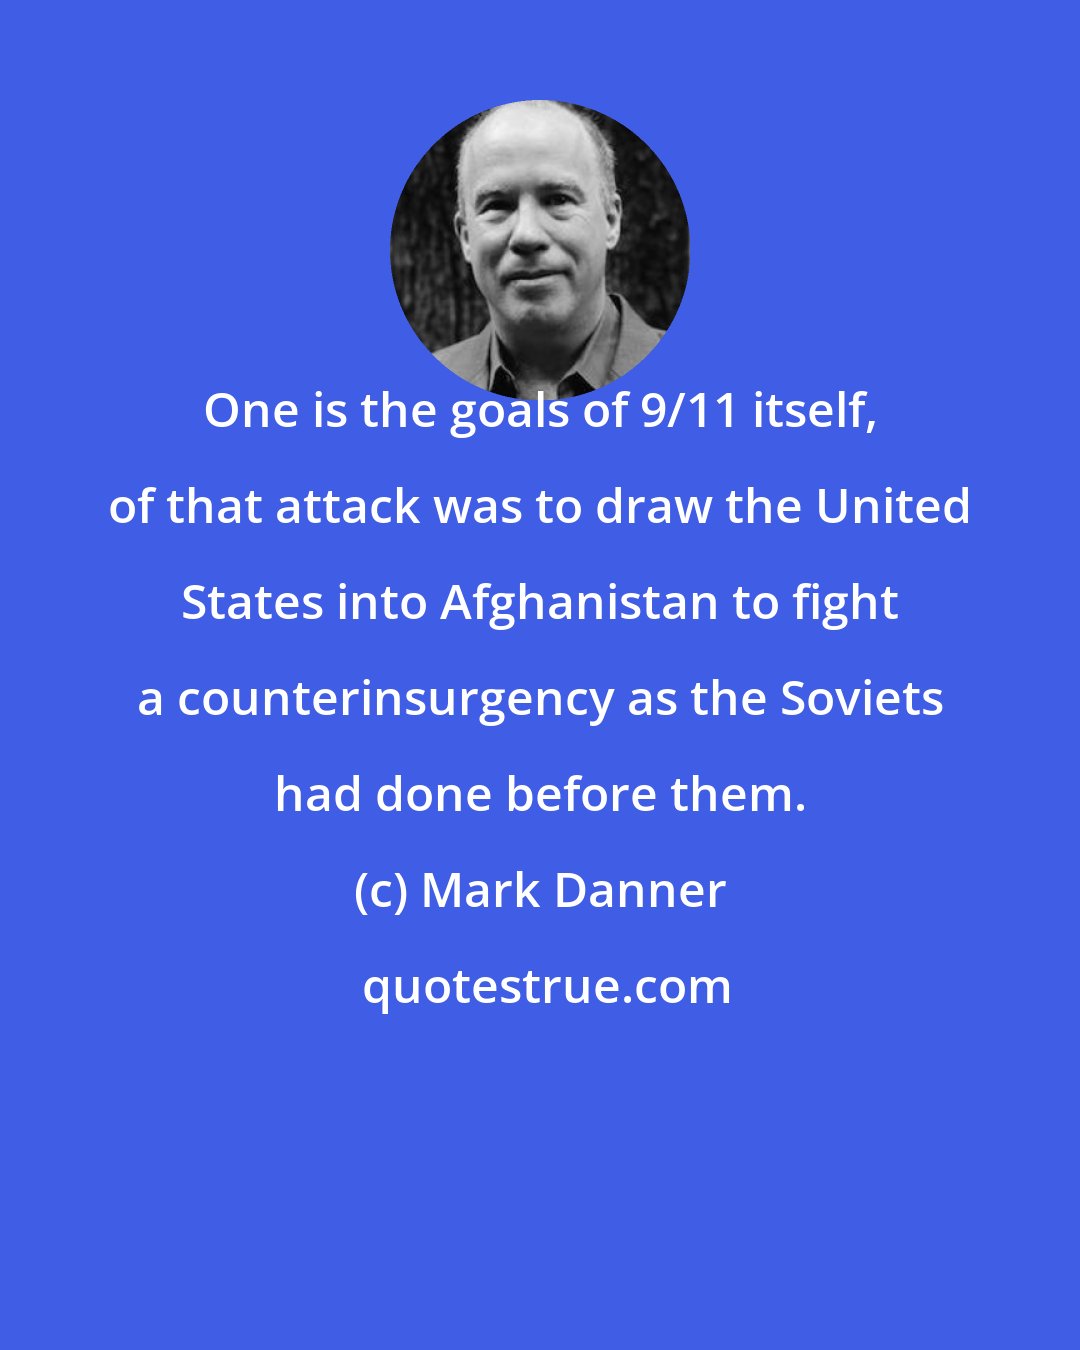 Mark Danner: One is the goals of 9/11 itself, of that attack was to draw the United States into Afghanistan to fight a counterinsurgency as the Soviets had done before them.